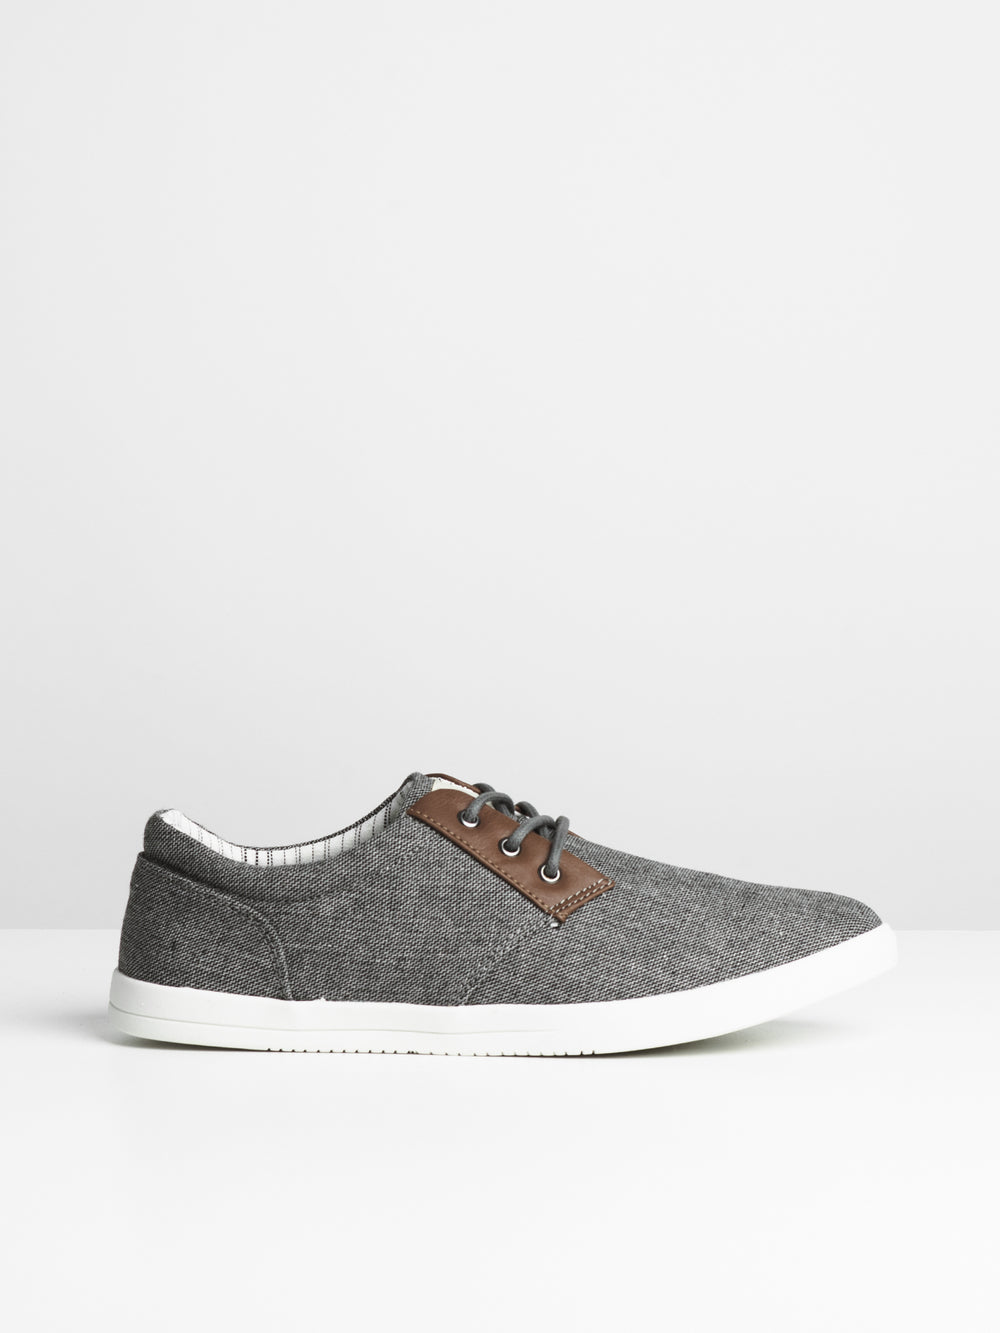 MENS RILEY - CLEARANCE